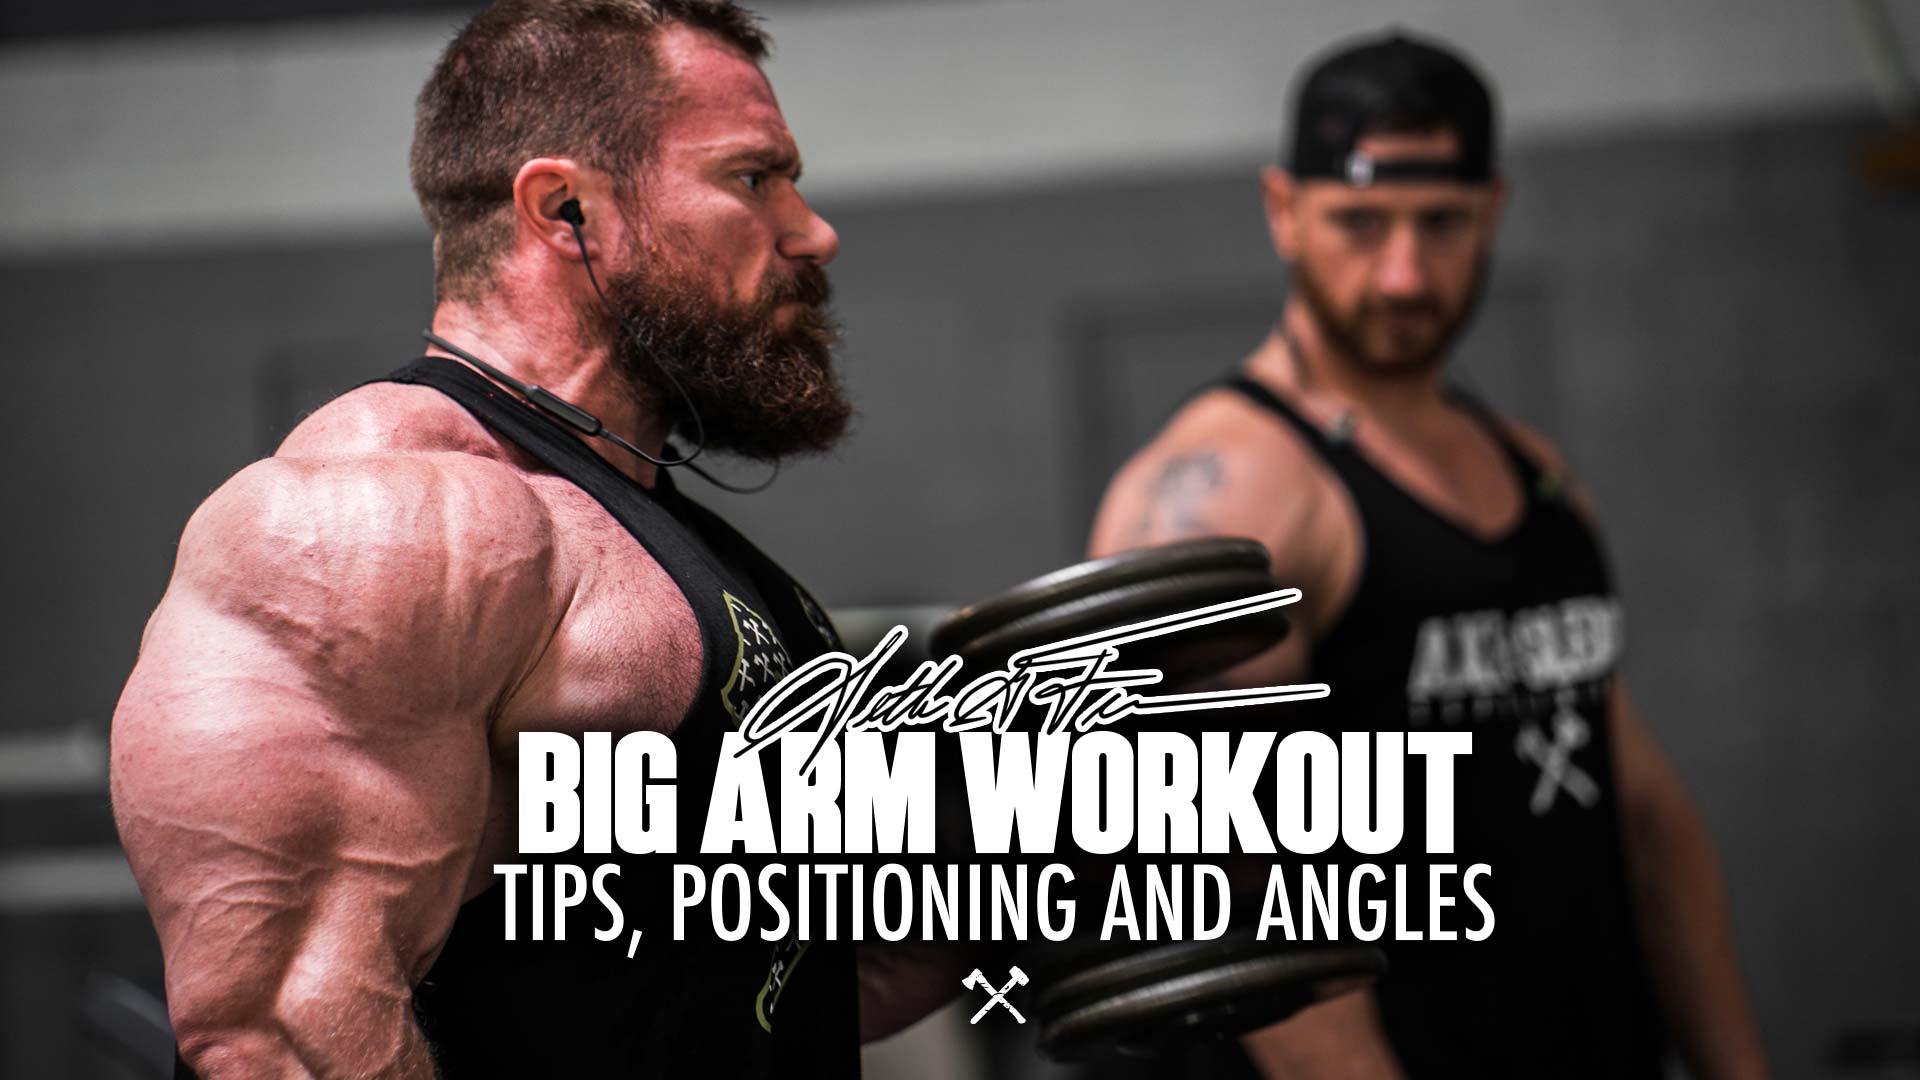 Big Arm Workout, Tips, Positioning, and Angles